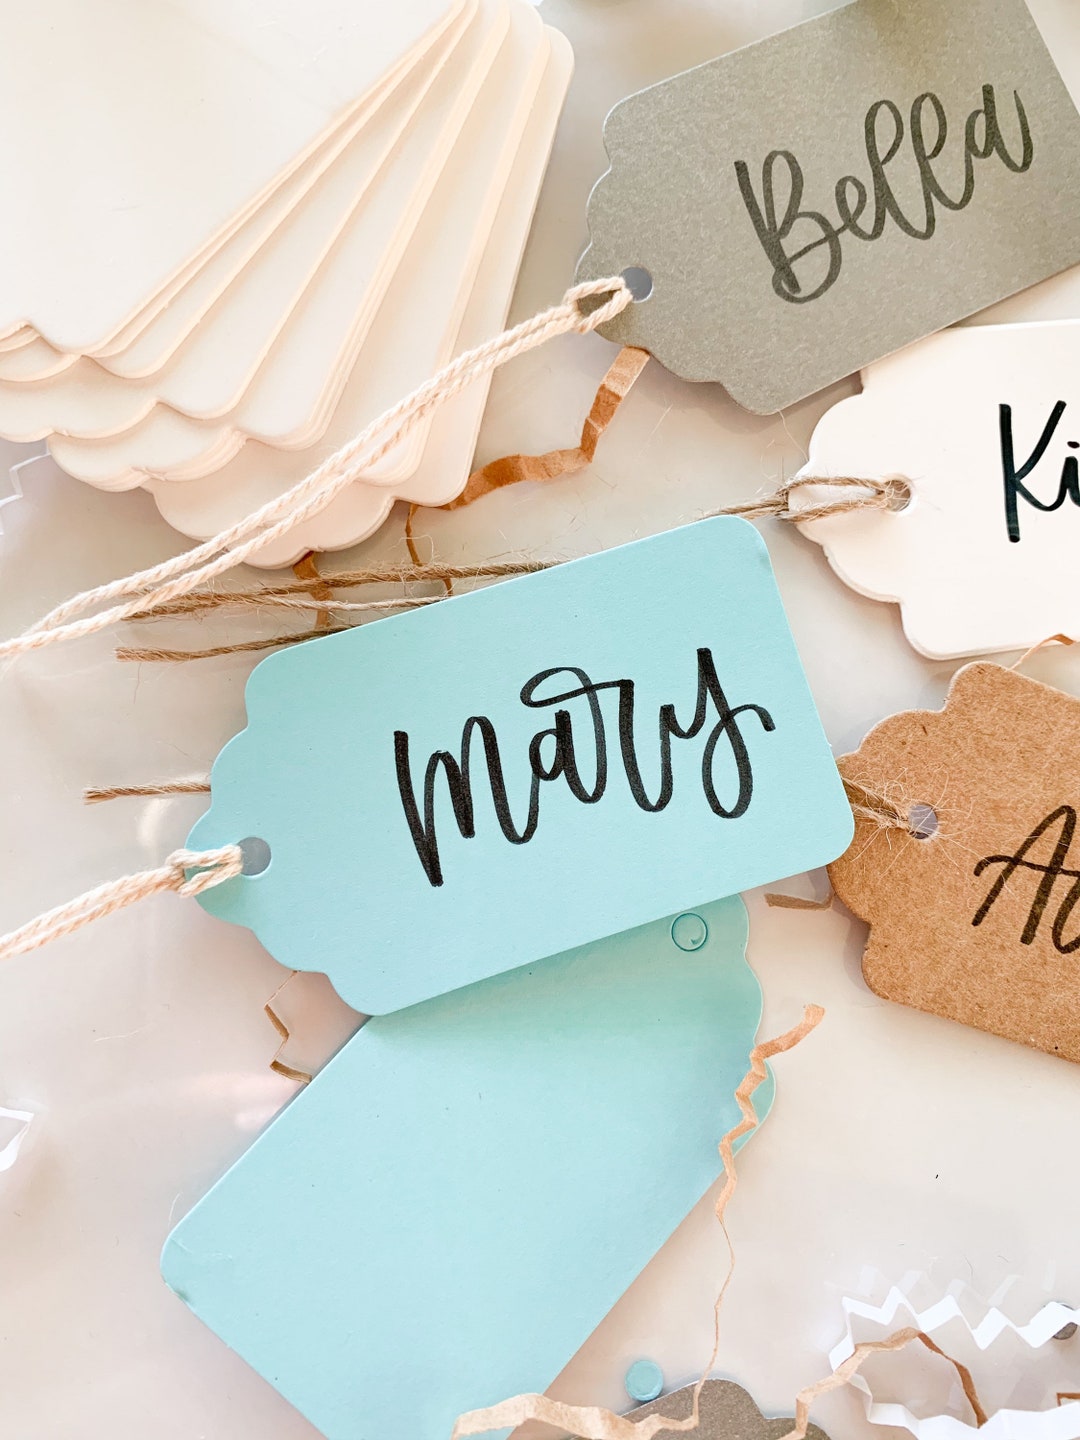 Editable ThanK You tags Rustic Favor Tags Gift Tag Adult Birthday Wedd -  Design My Party Studio